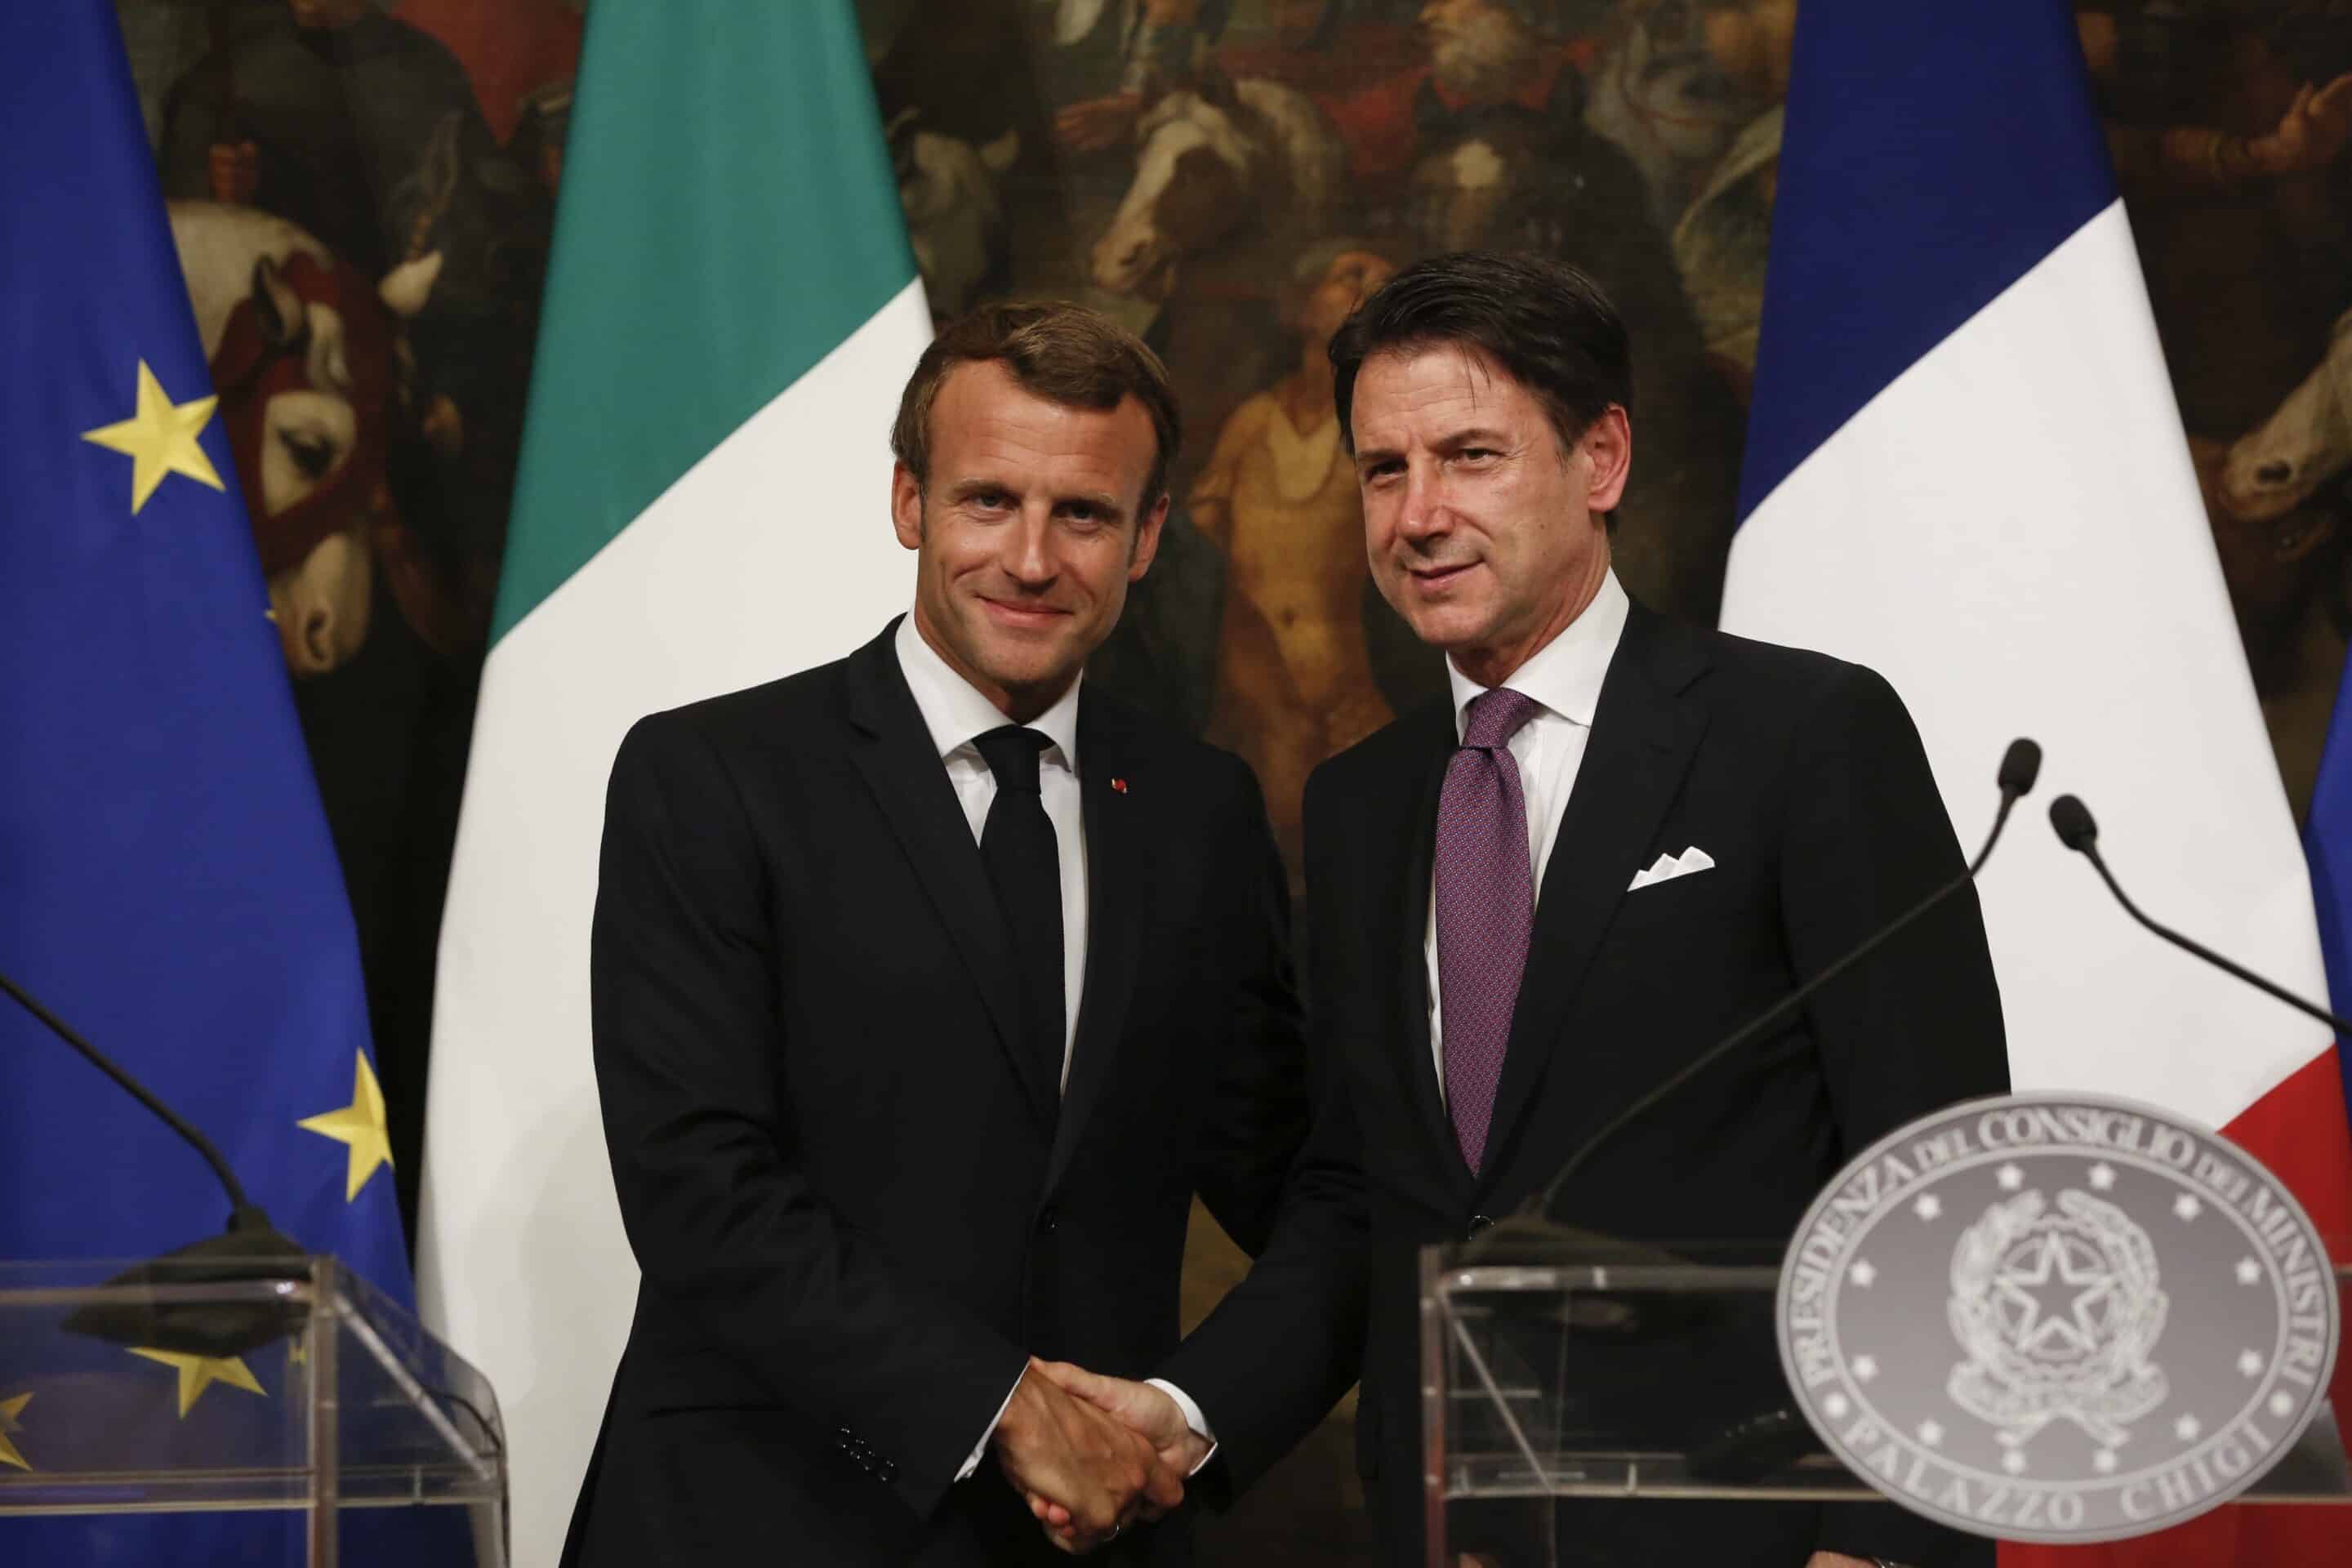 FILE - In this Wednesday, Sept. 18, 2019 file photo, French President Emmanuel Macron and Italian Premier Giuseppe Conte pose as they meet the media at Chigi Palace Premier office in Rome. (AP Photo/Domenico Stinellis, File)/XFP107/a3e6b3d1616546318f3a4f4f003072b7-d5909b692a7a42848eeb5b353a548473/Wednesday, Sept. 18, 2019 filer/2102150848